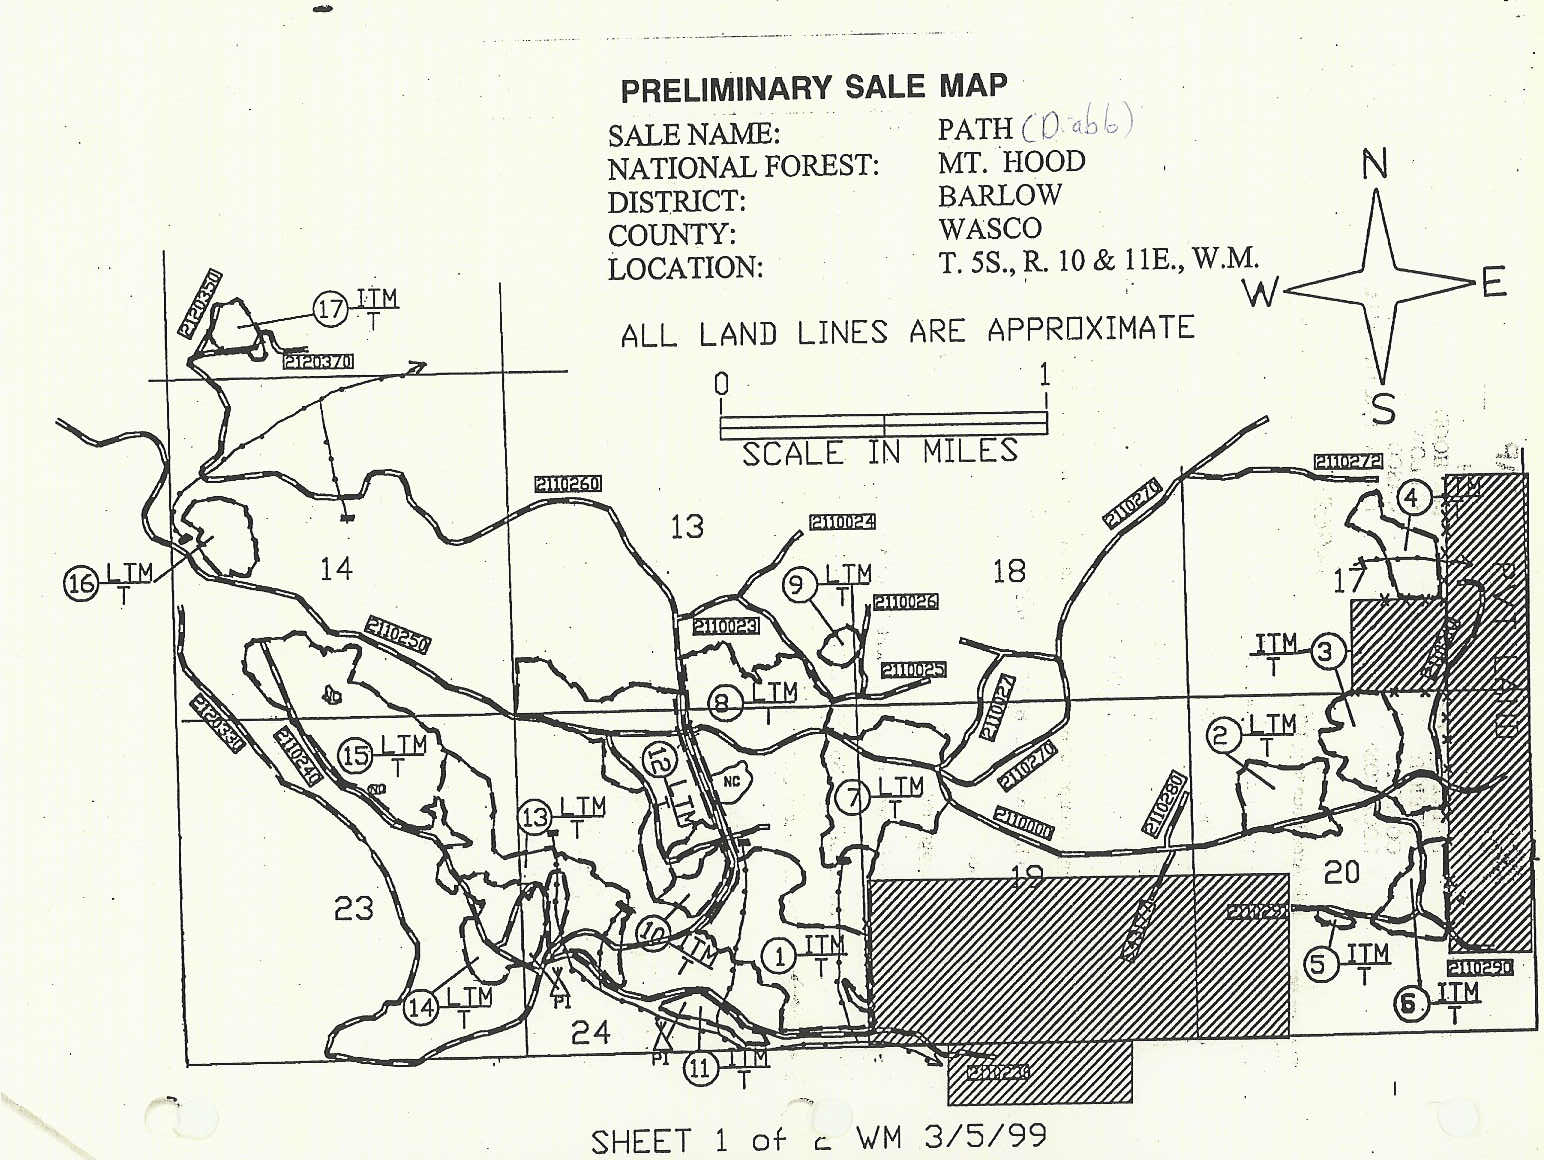 Scan of a map of the paths created by the Forest Service while logging the Diablo Timber Sale.